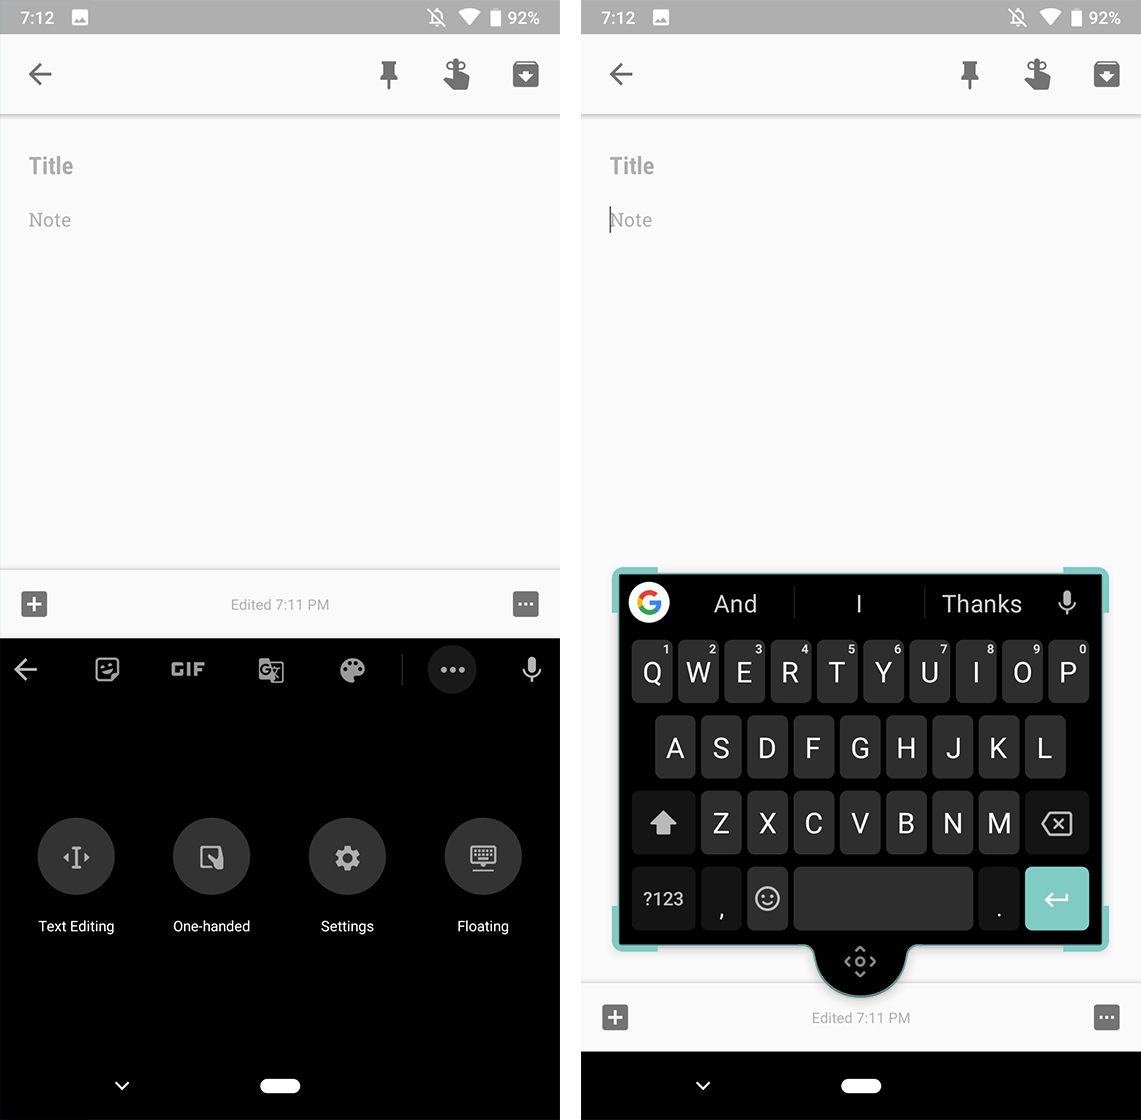 Activating the Floating keyboard in Gboard